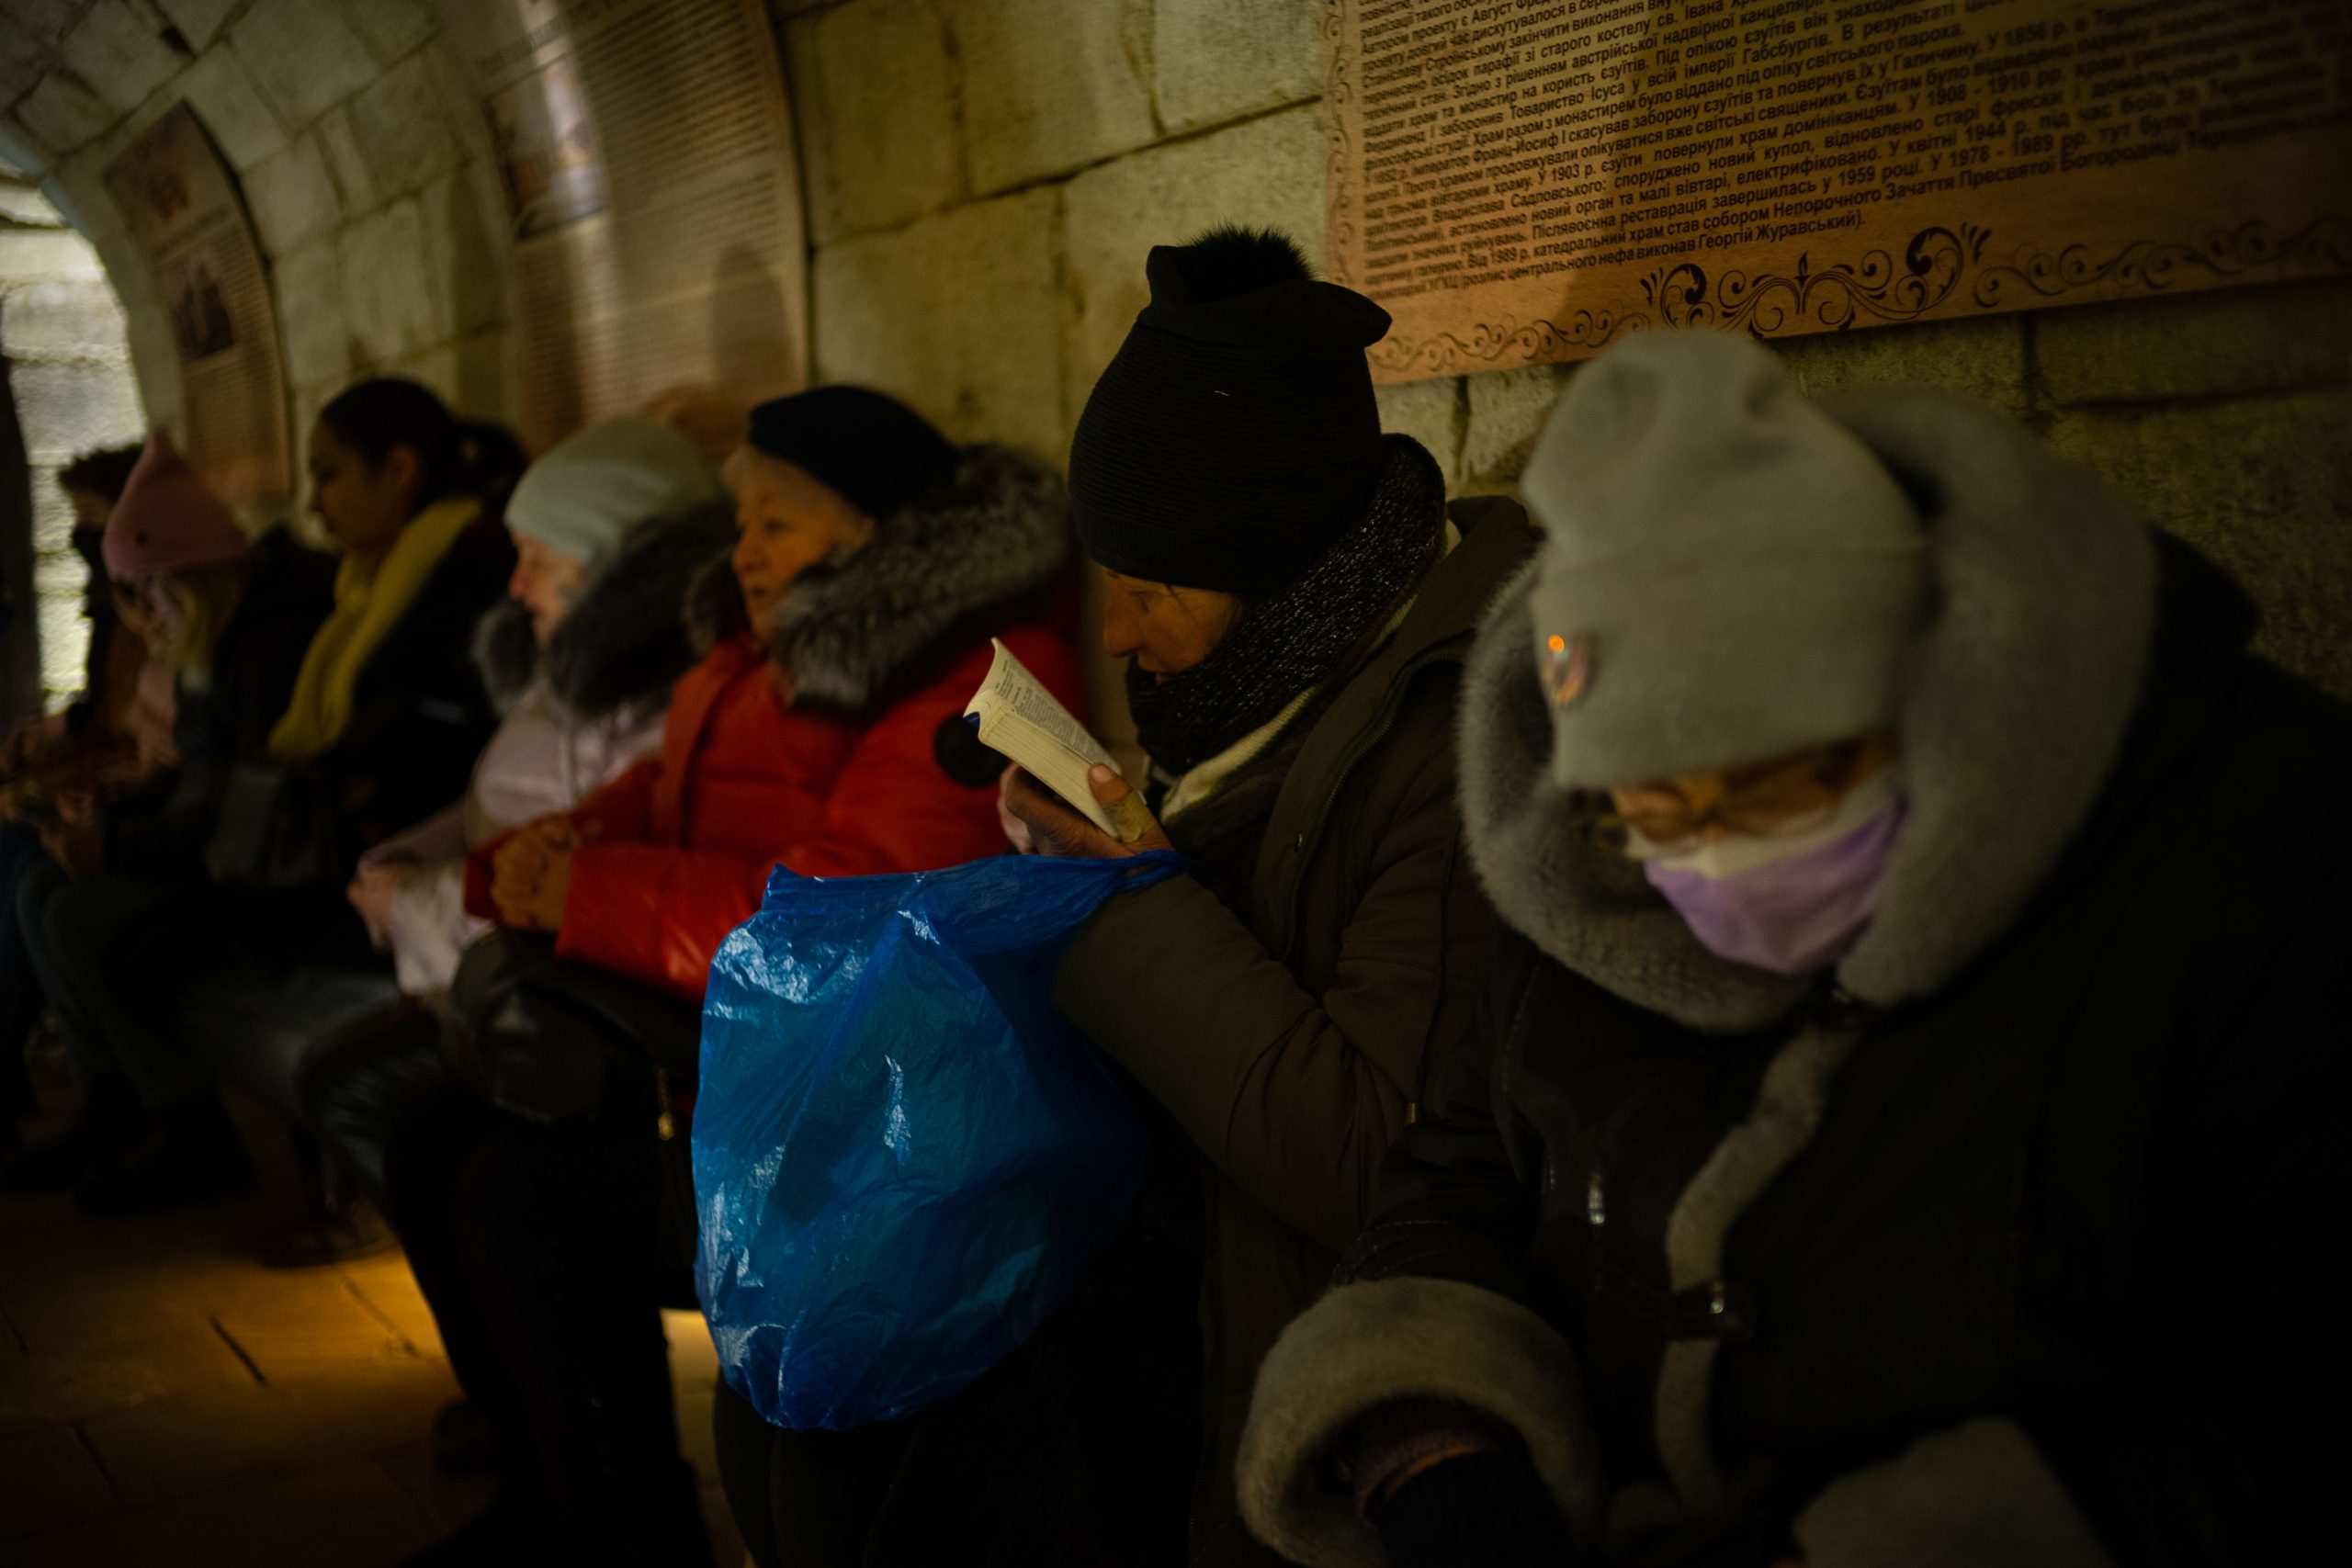 Ukrainians bundled up insider the Cathedral of the Conception of the Blessed Virgin Mary